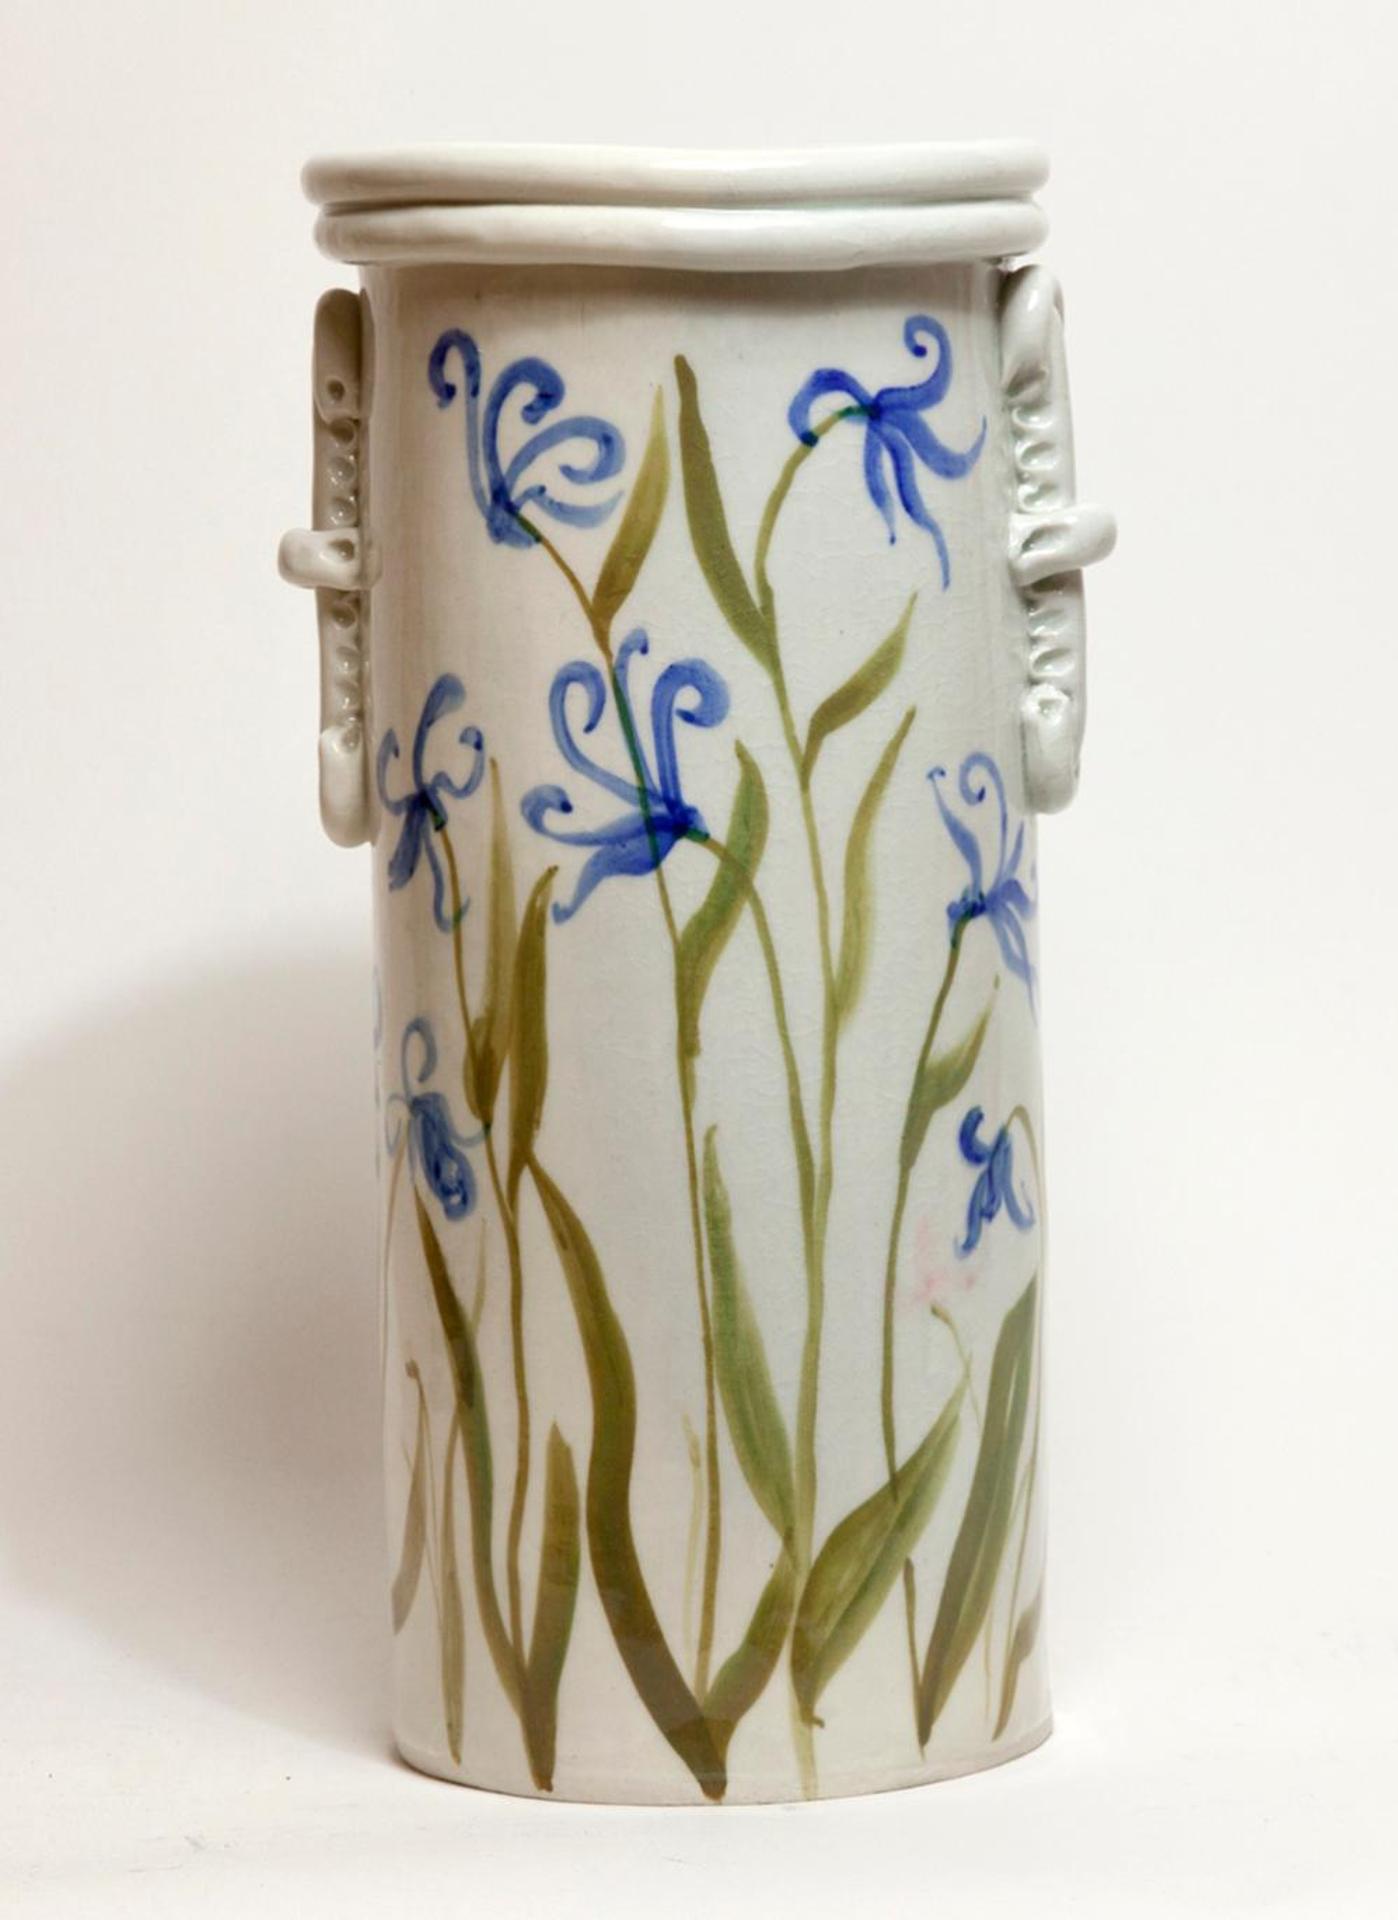 Maria Gakovic (1913-1999) - Untitled - tall ceramic container with flowers